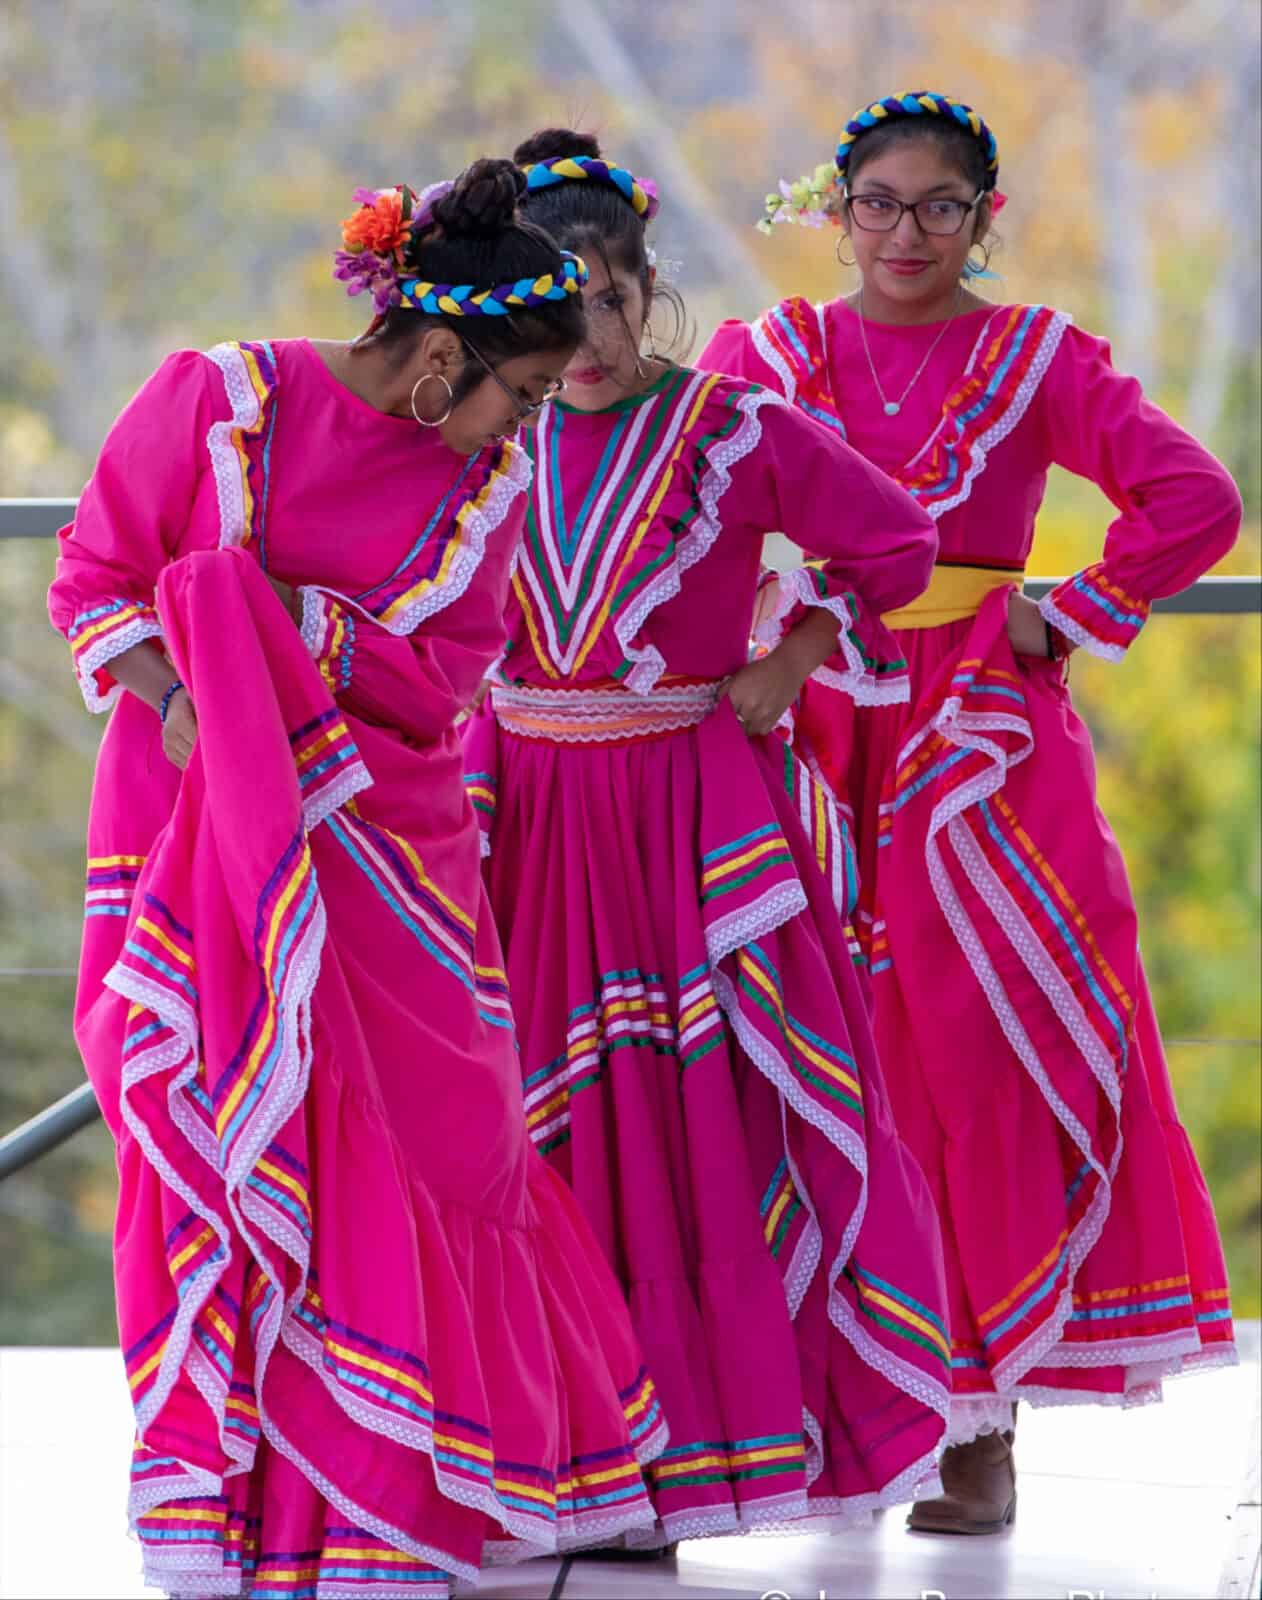 Dancers from Latinos Unidas perform a folkloric dance from Mexico on the Leir Stage at Jacob's Pillow in the BRIDGE gala. Press photo courtesy of BRIDGE